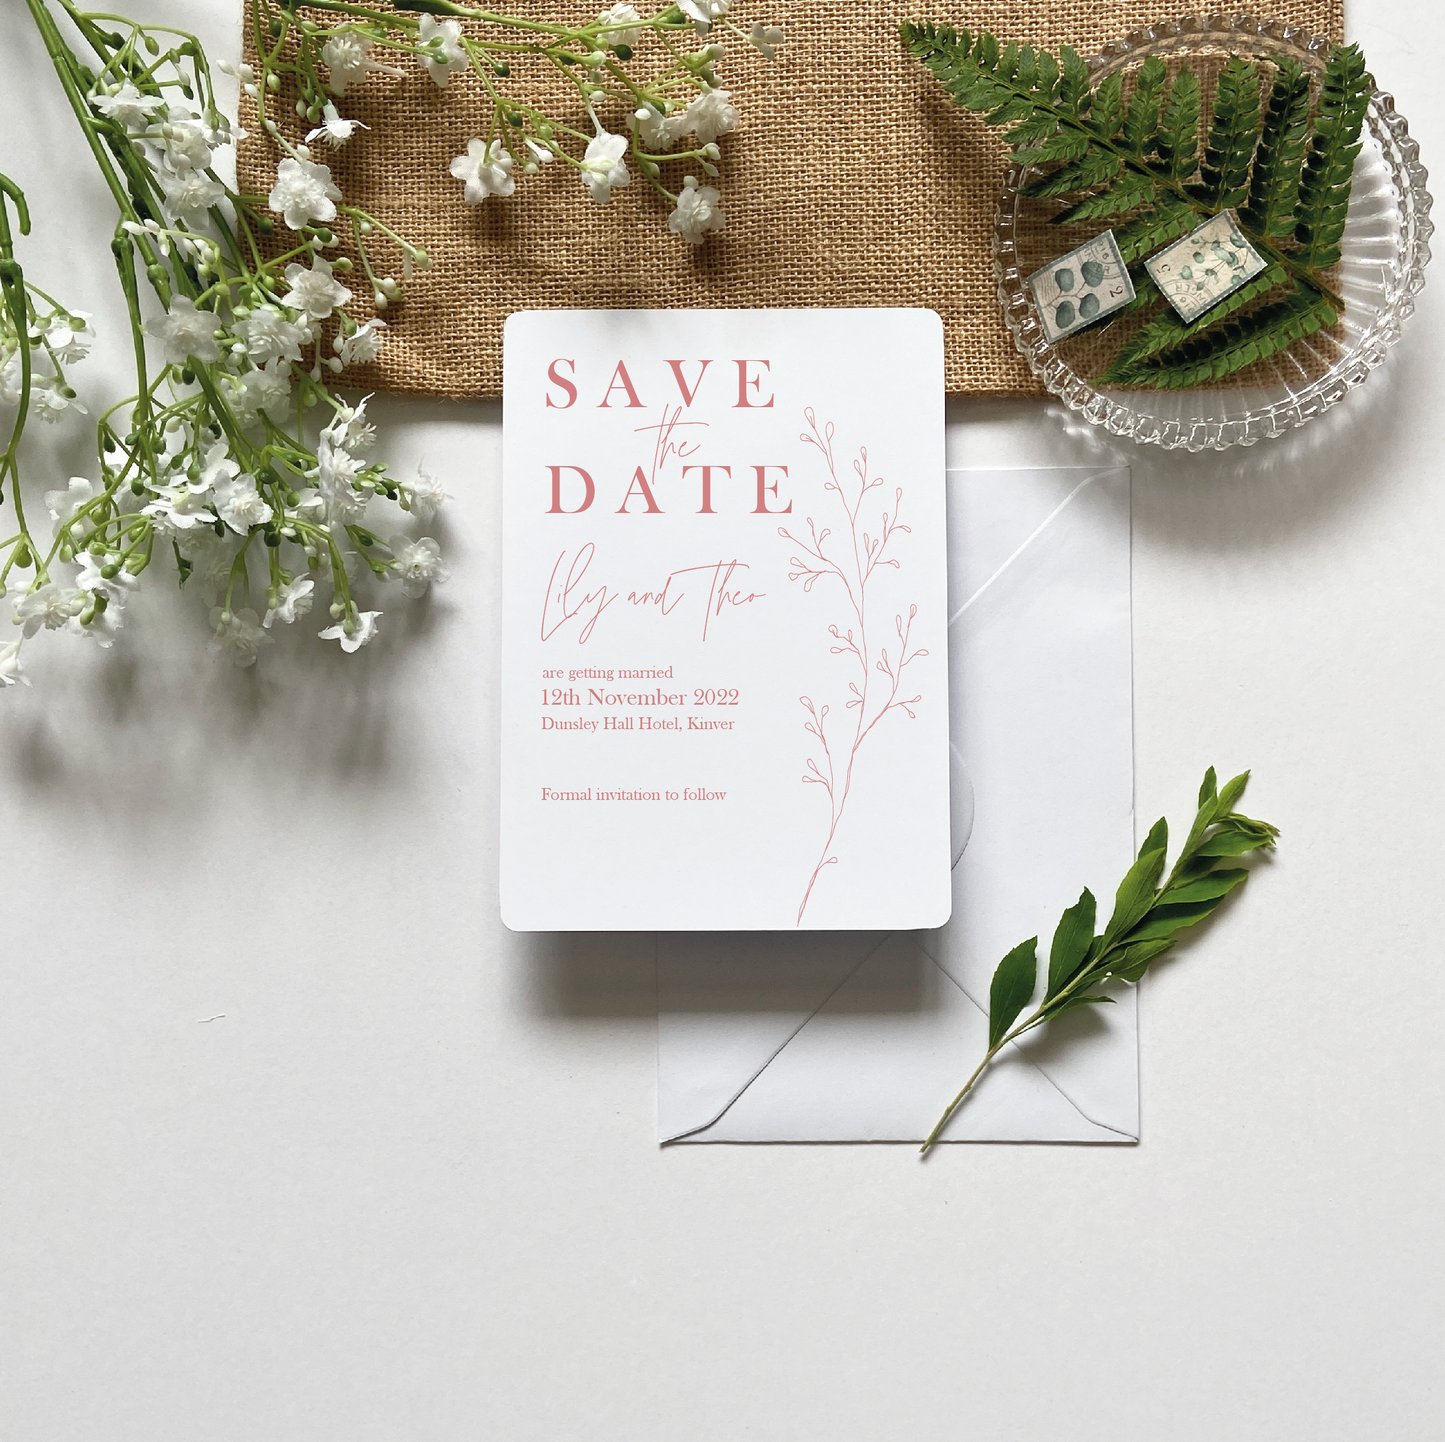 DEVOTION save the date